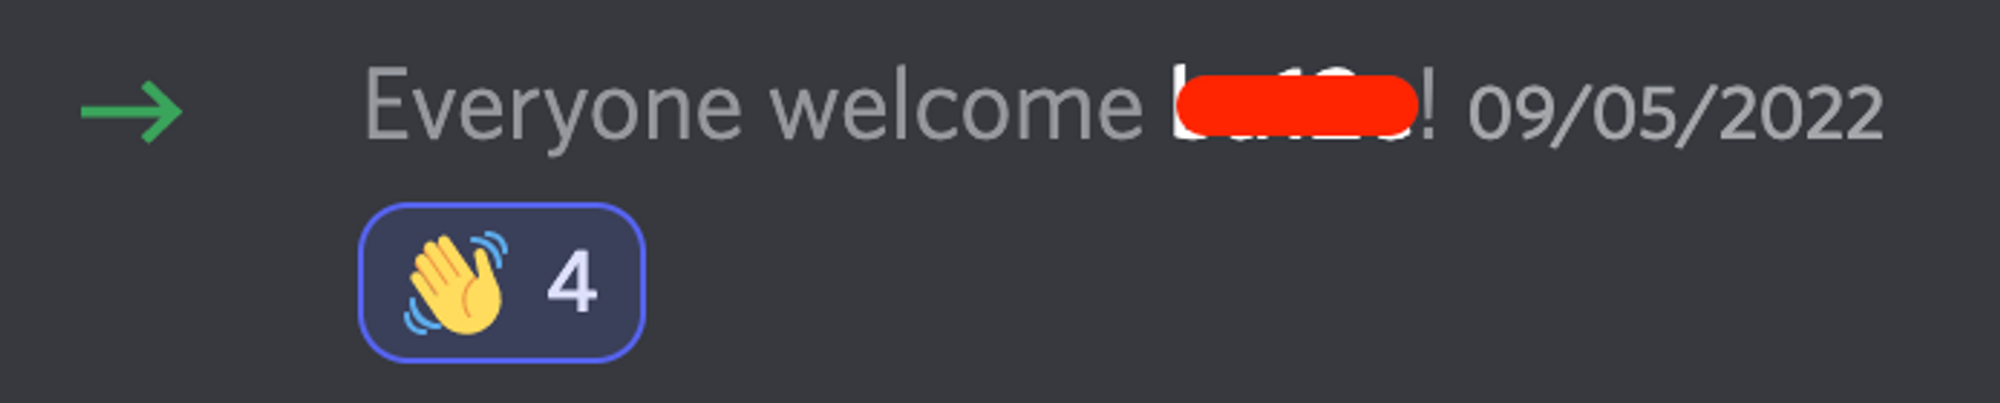 Automatic welcome message on Discord